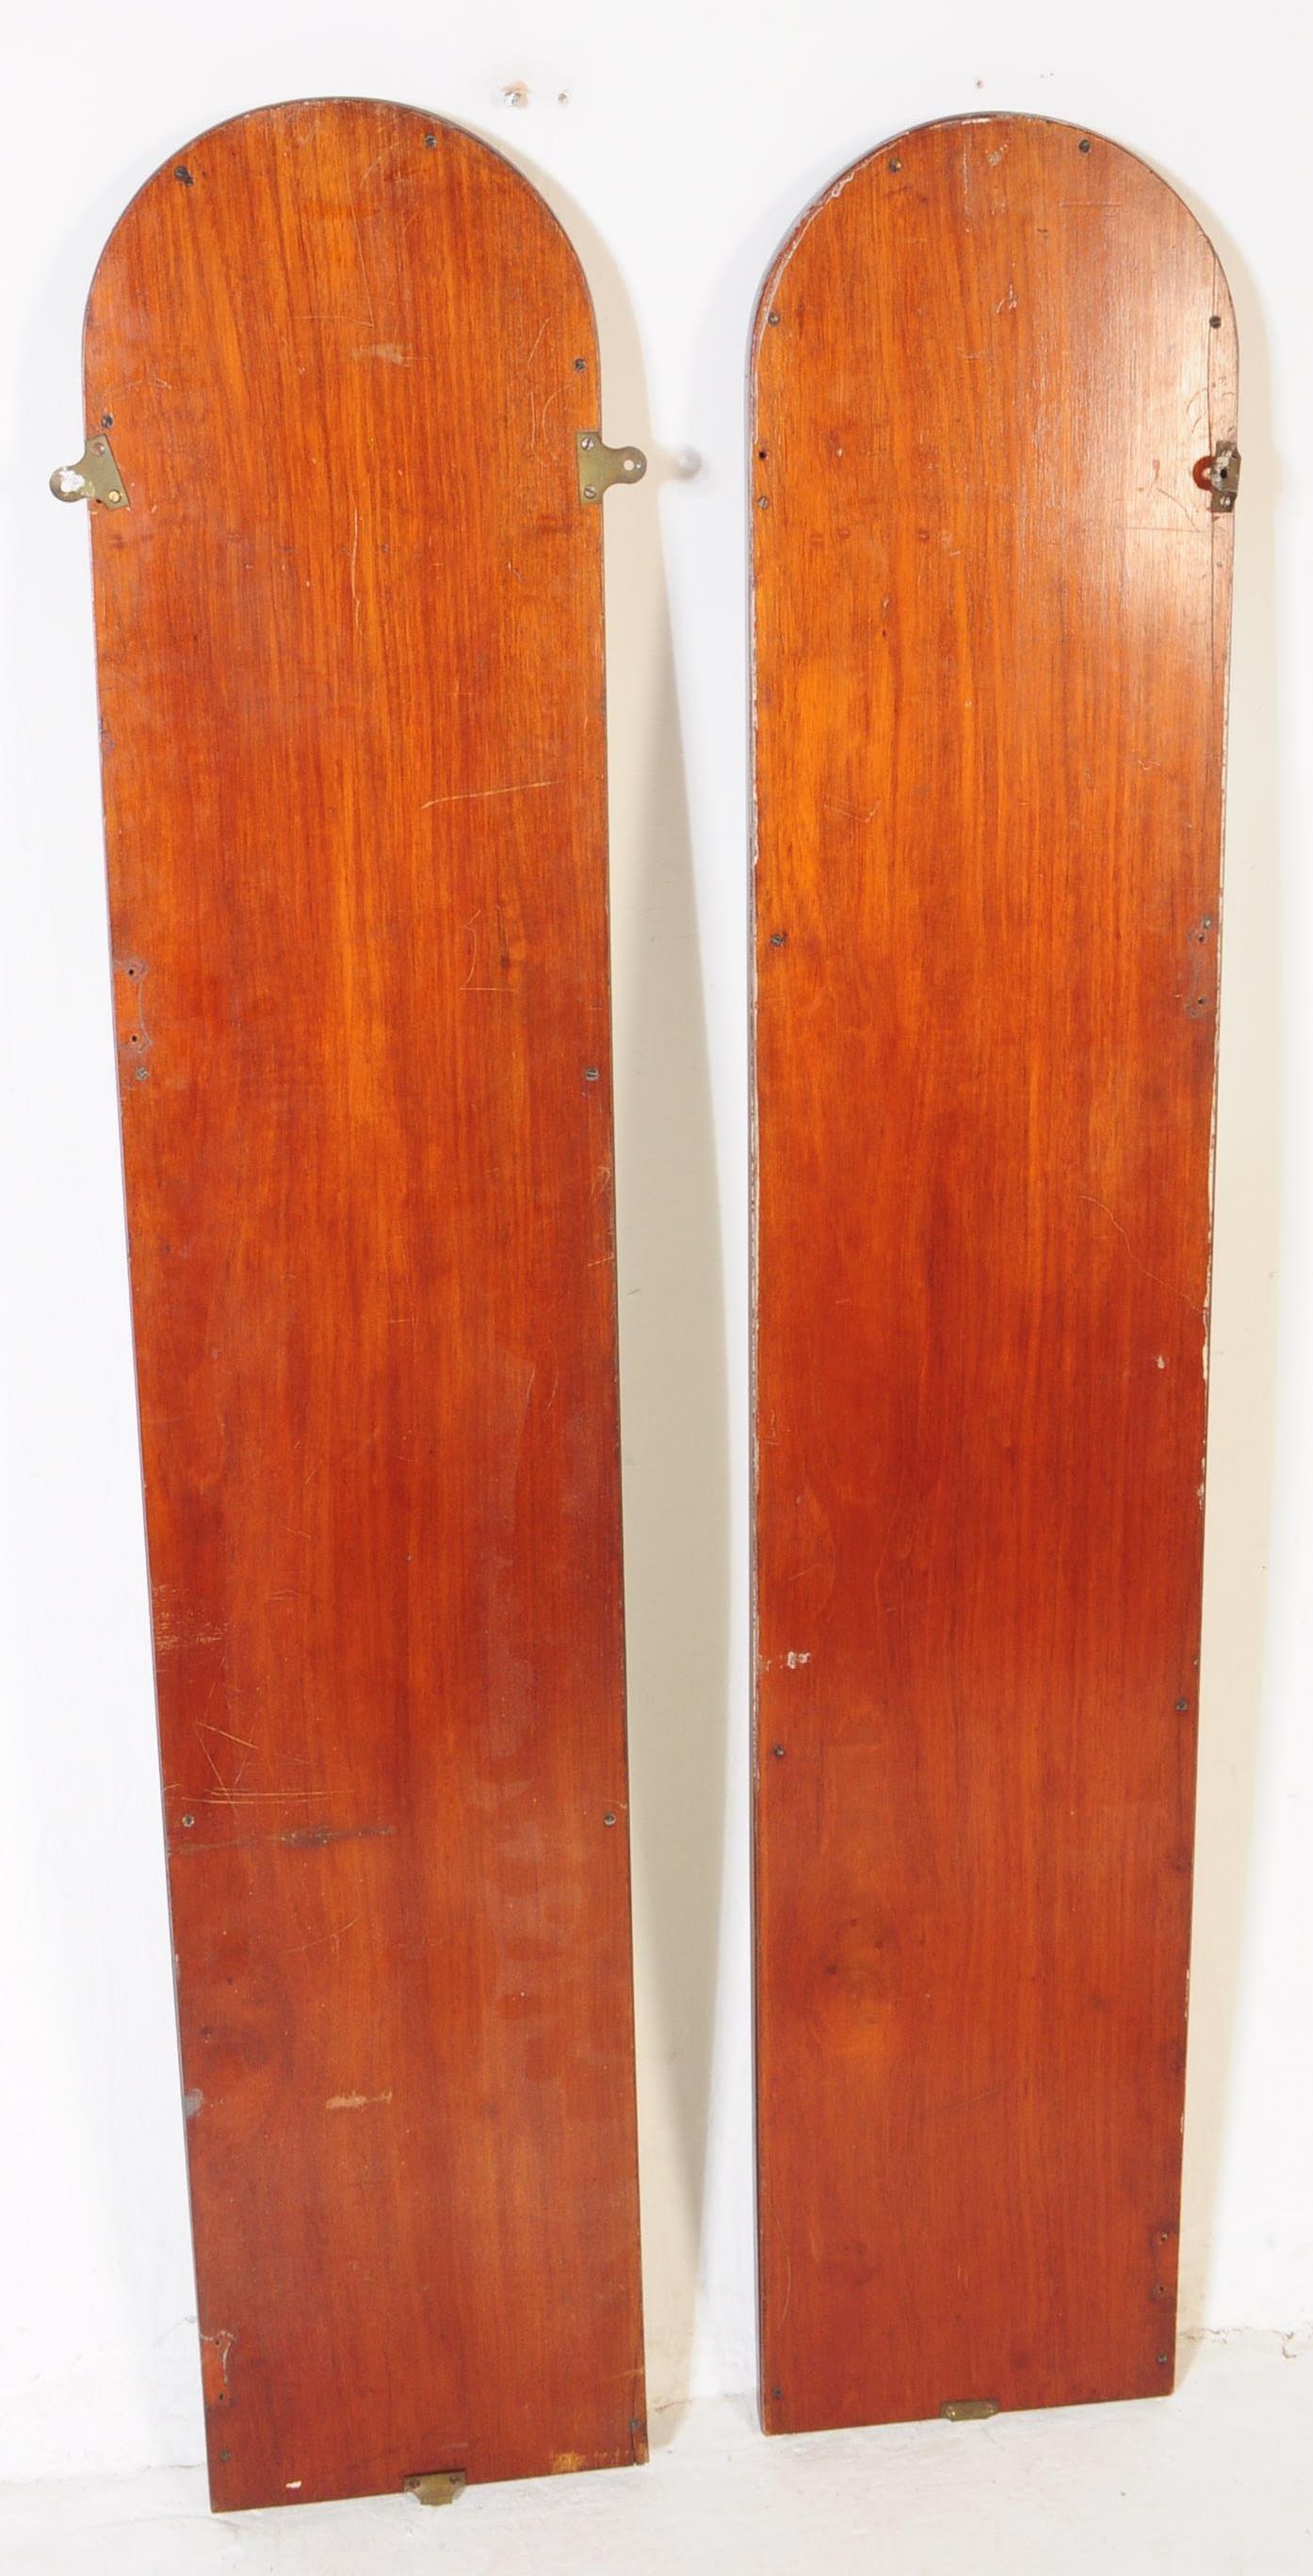 PAIR OF 1920S ELONGATED ARCHED WALL MIRRORS - Image 4 of 5